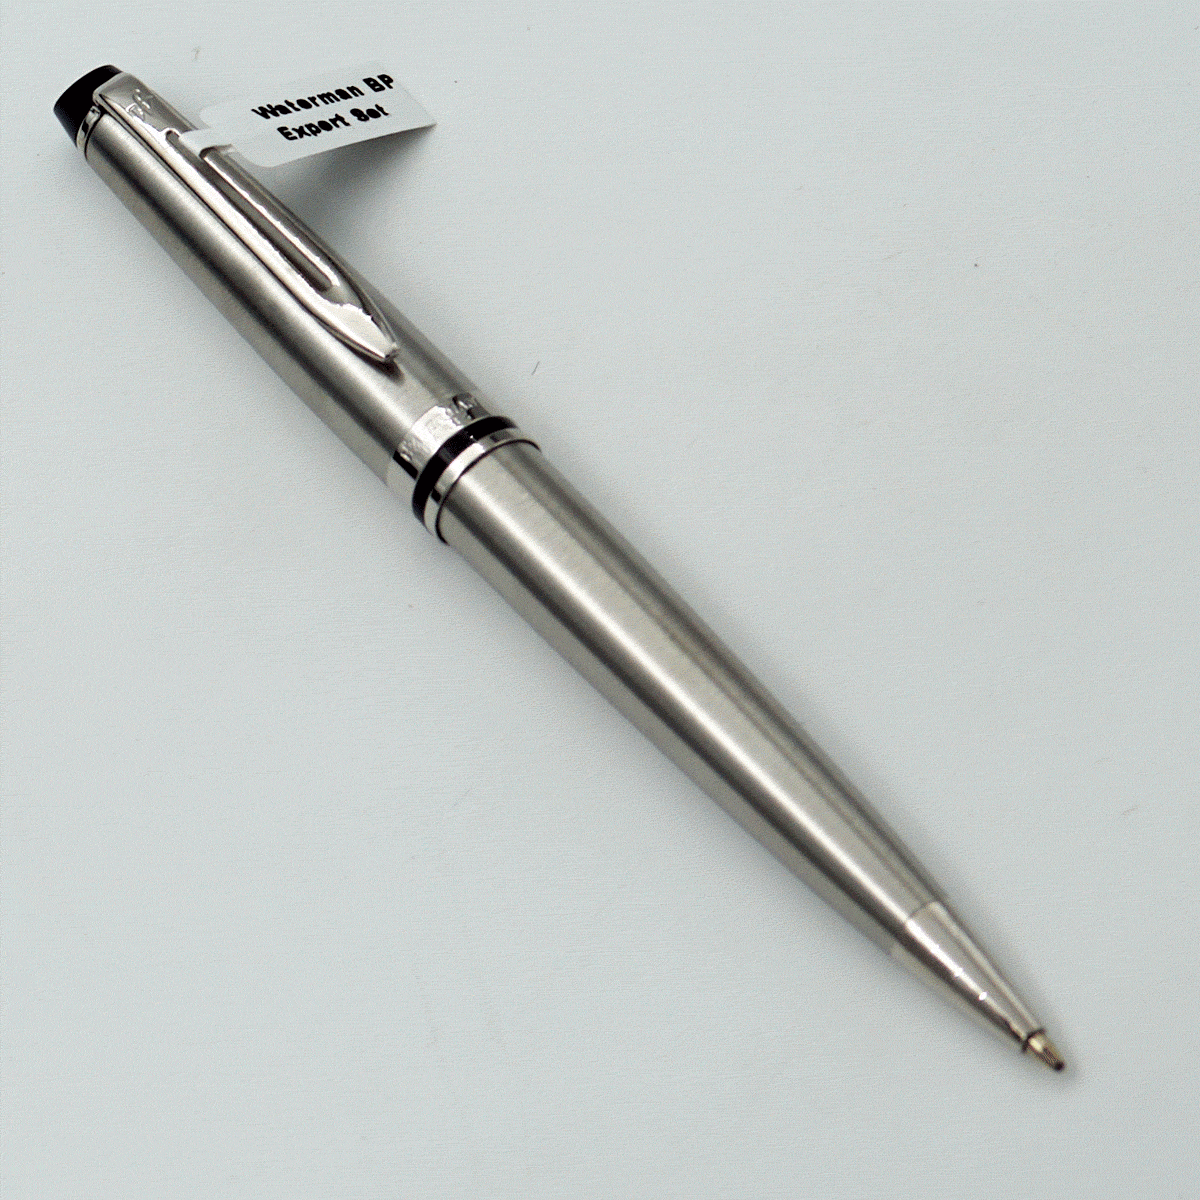 Waterman Expert Stainless Steel Body With Silver Clip Medium Tip Twist Type Ball Pen With Wallet SKU 24493